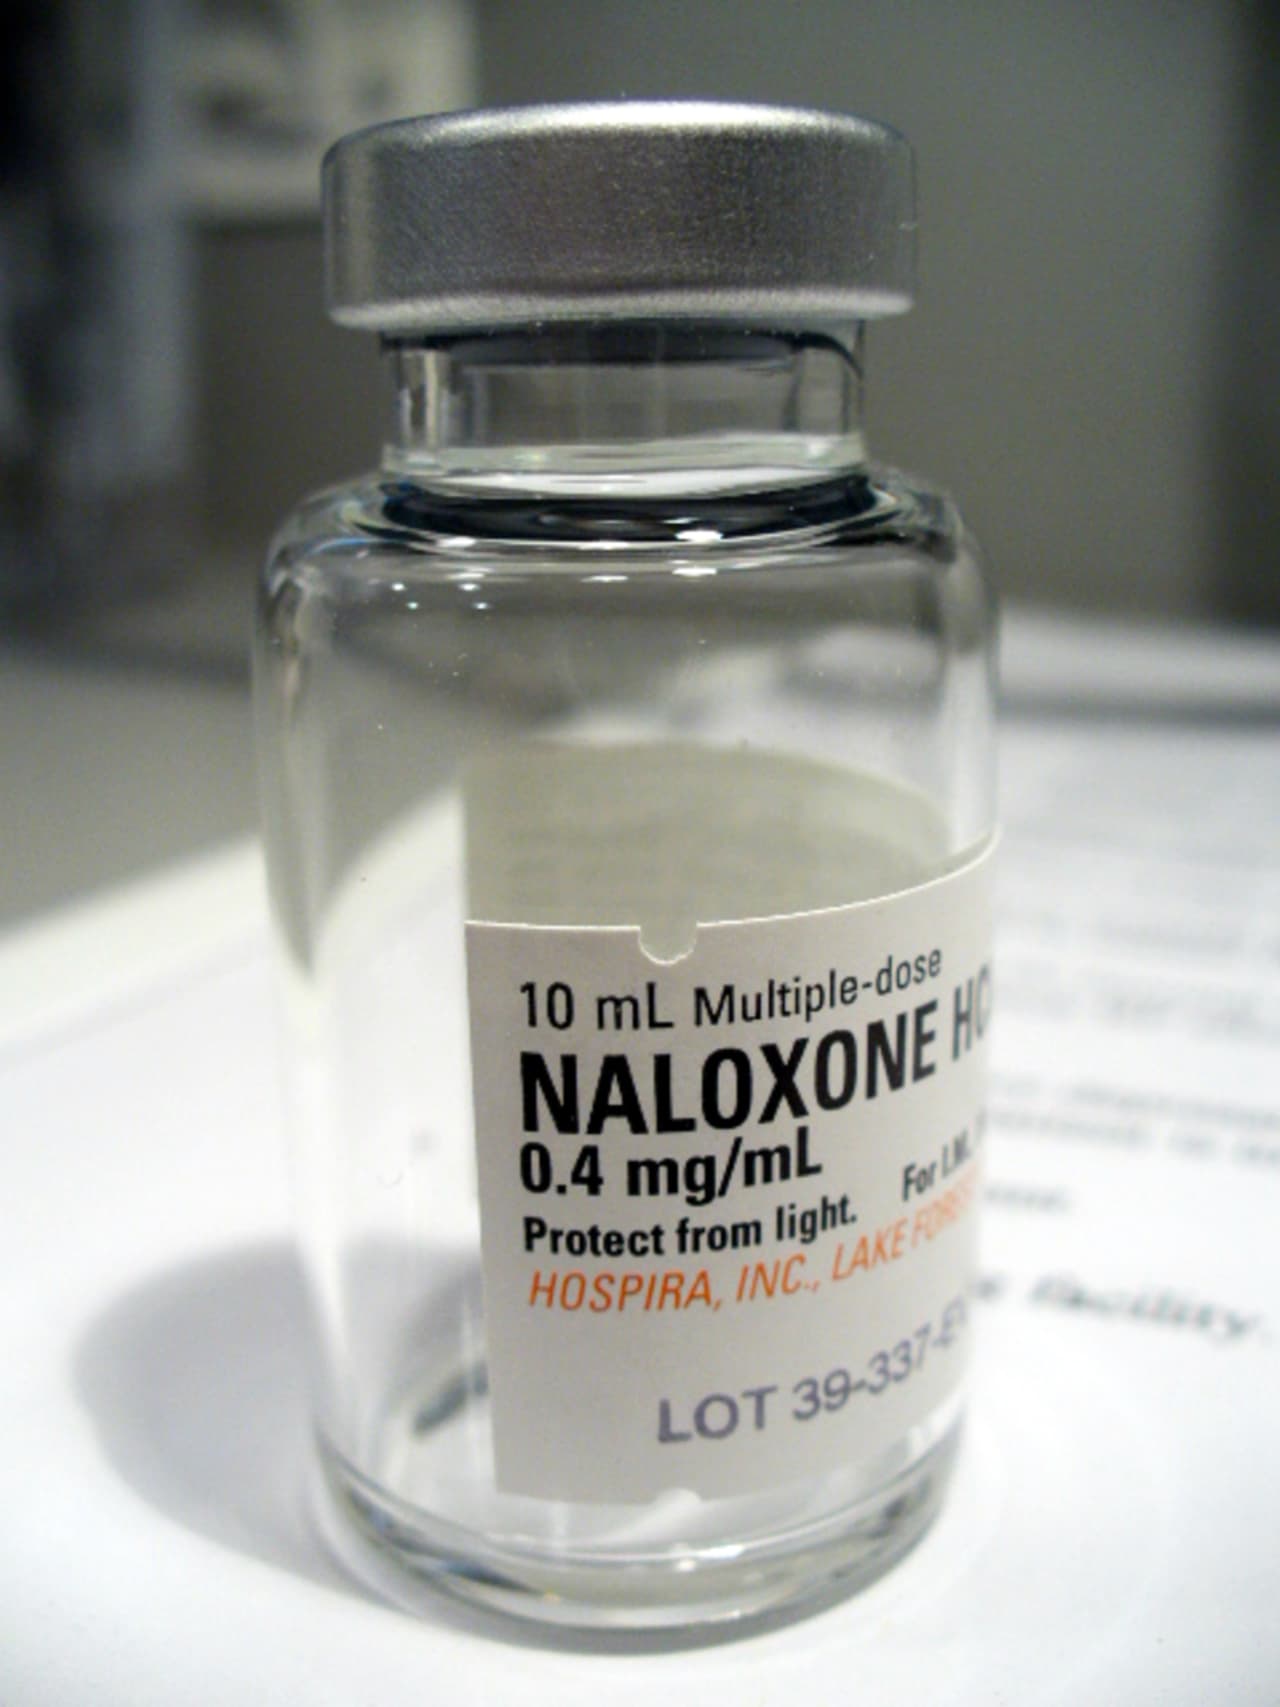 Ramapo police and local paramedics used Naloxone (Narcan) to revive a man in Hillcrest this past weekend who had overdosed on heroin.